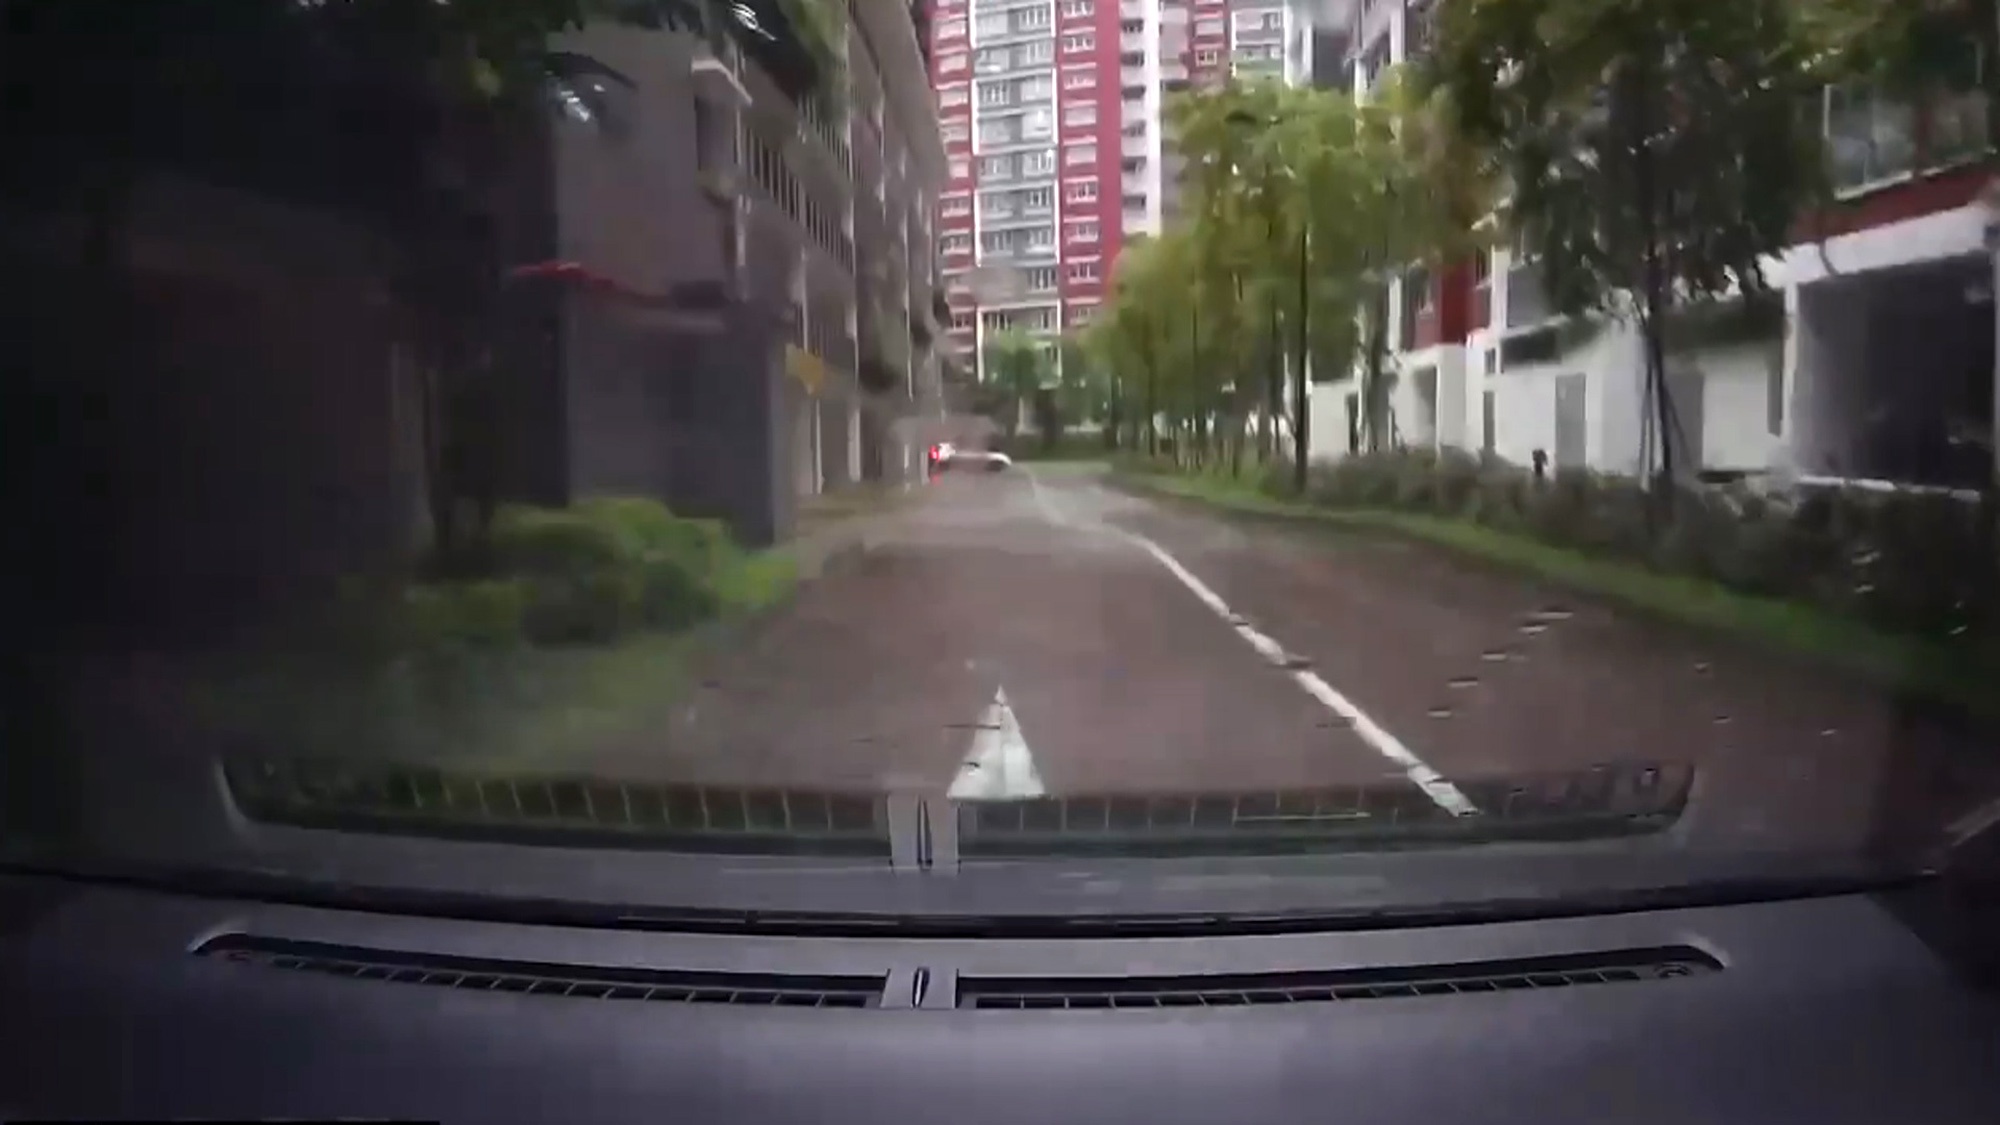 Read more about the article Dashboard Cam Captures Manhole Explosion That Sent Bricks Flying In Singapore